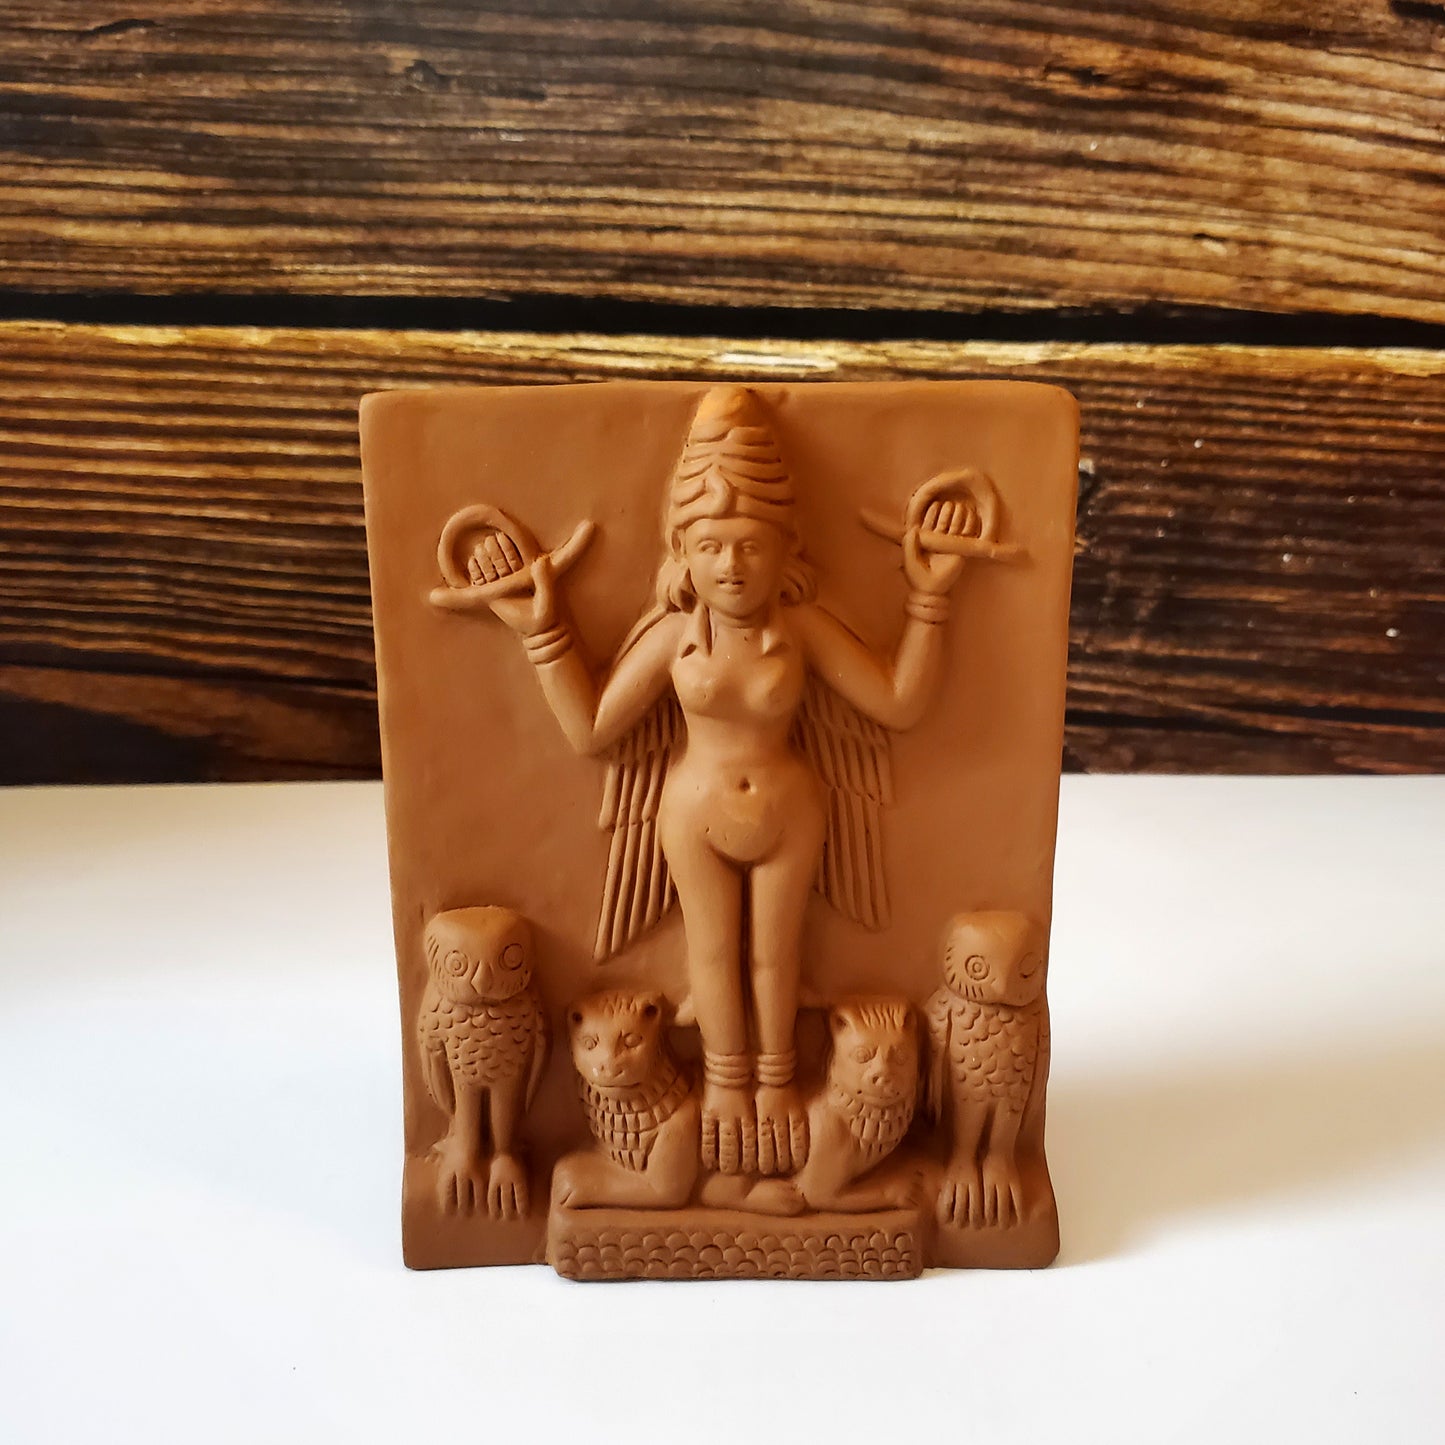 Sumerian Lilith Wall Plaque Hanging | Handmade Goddess Home Decor Gifts 5"x6"